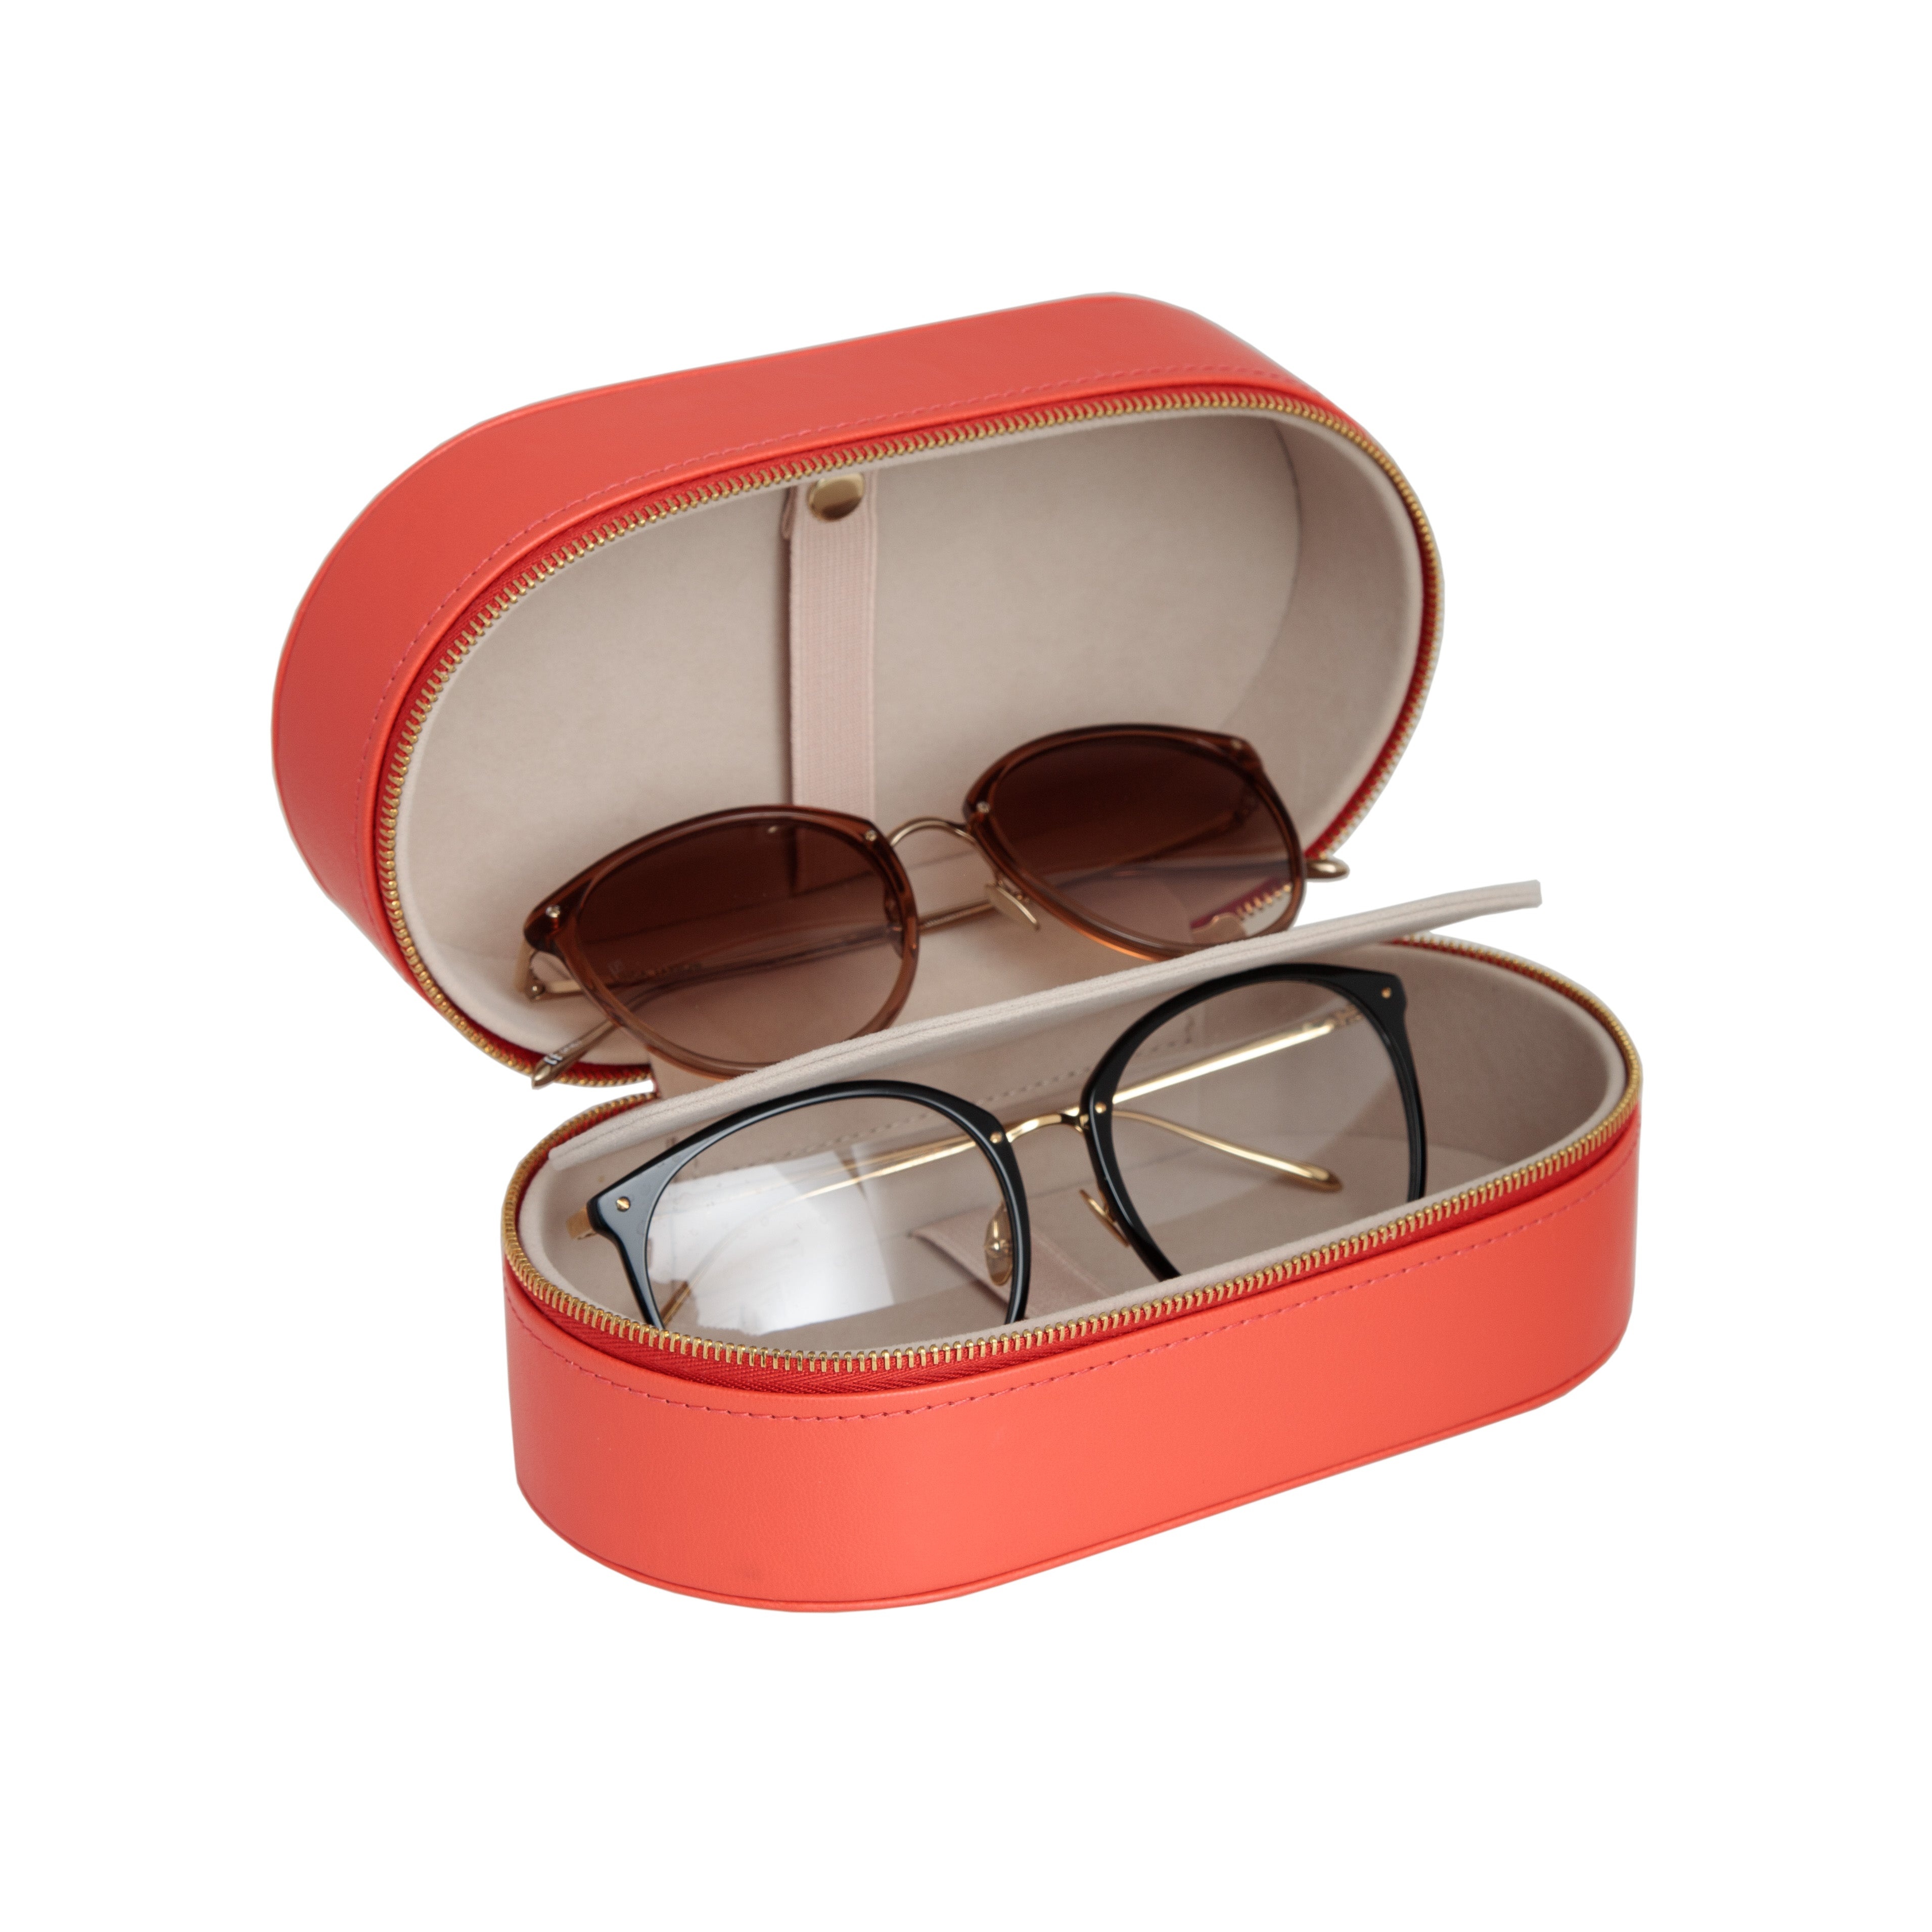 LINDA FARROW OVAL TRAVEL CASE IN CORAL - 1